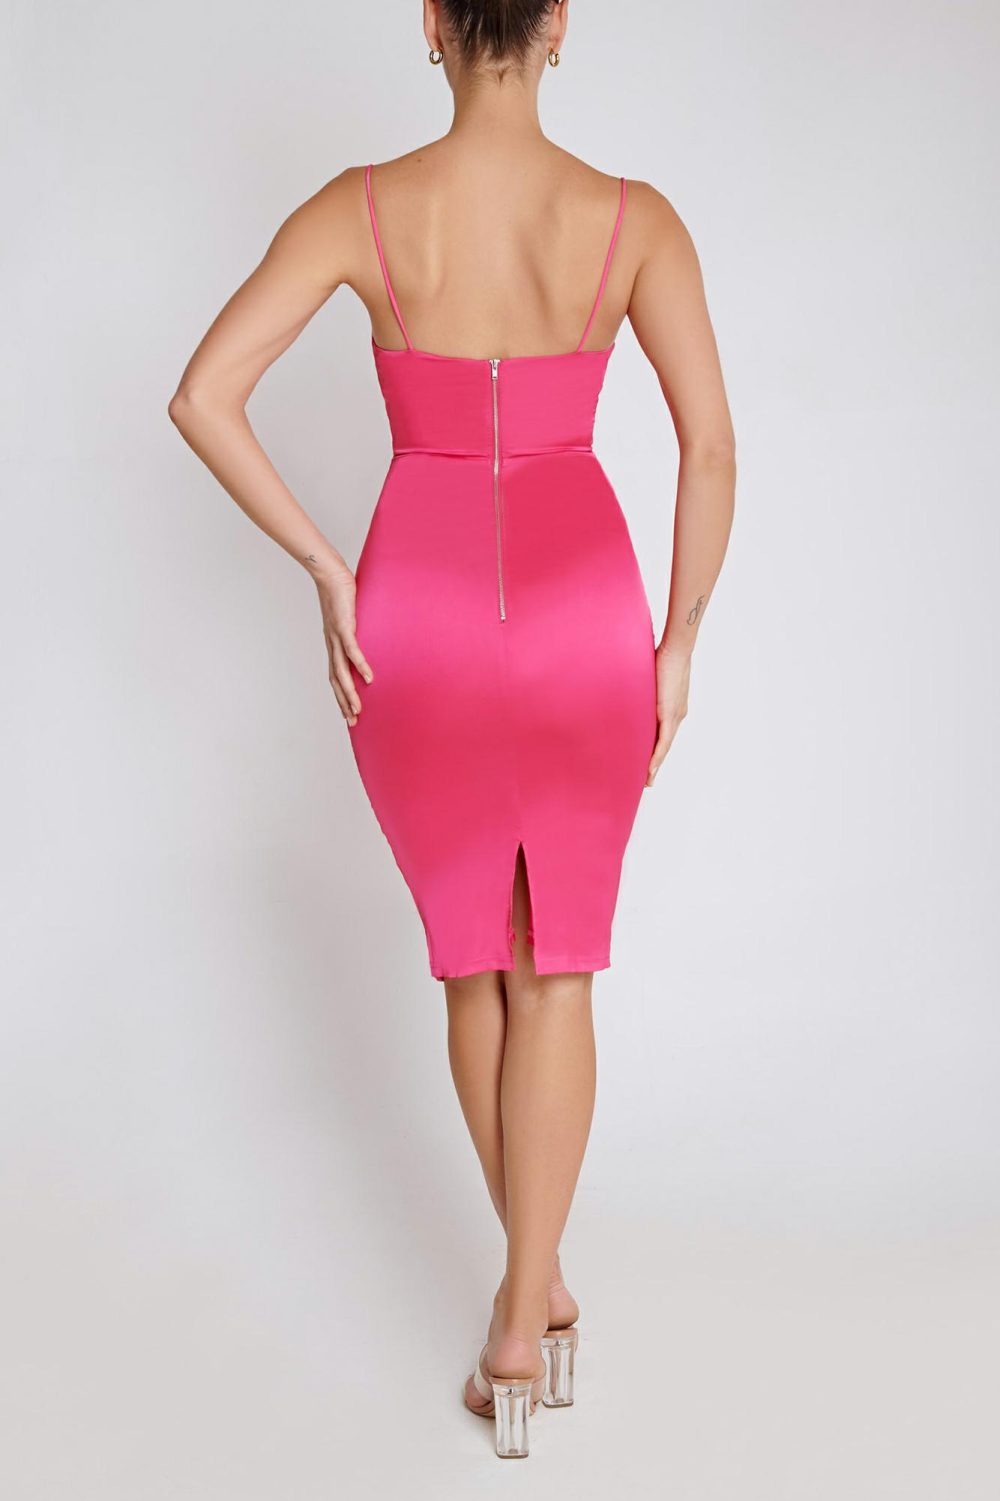 Ladies Dress Colour is Hot Pink